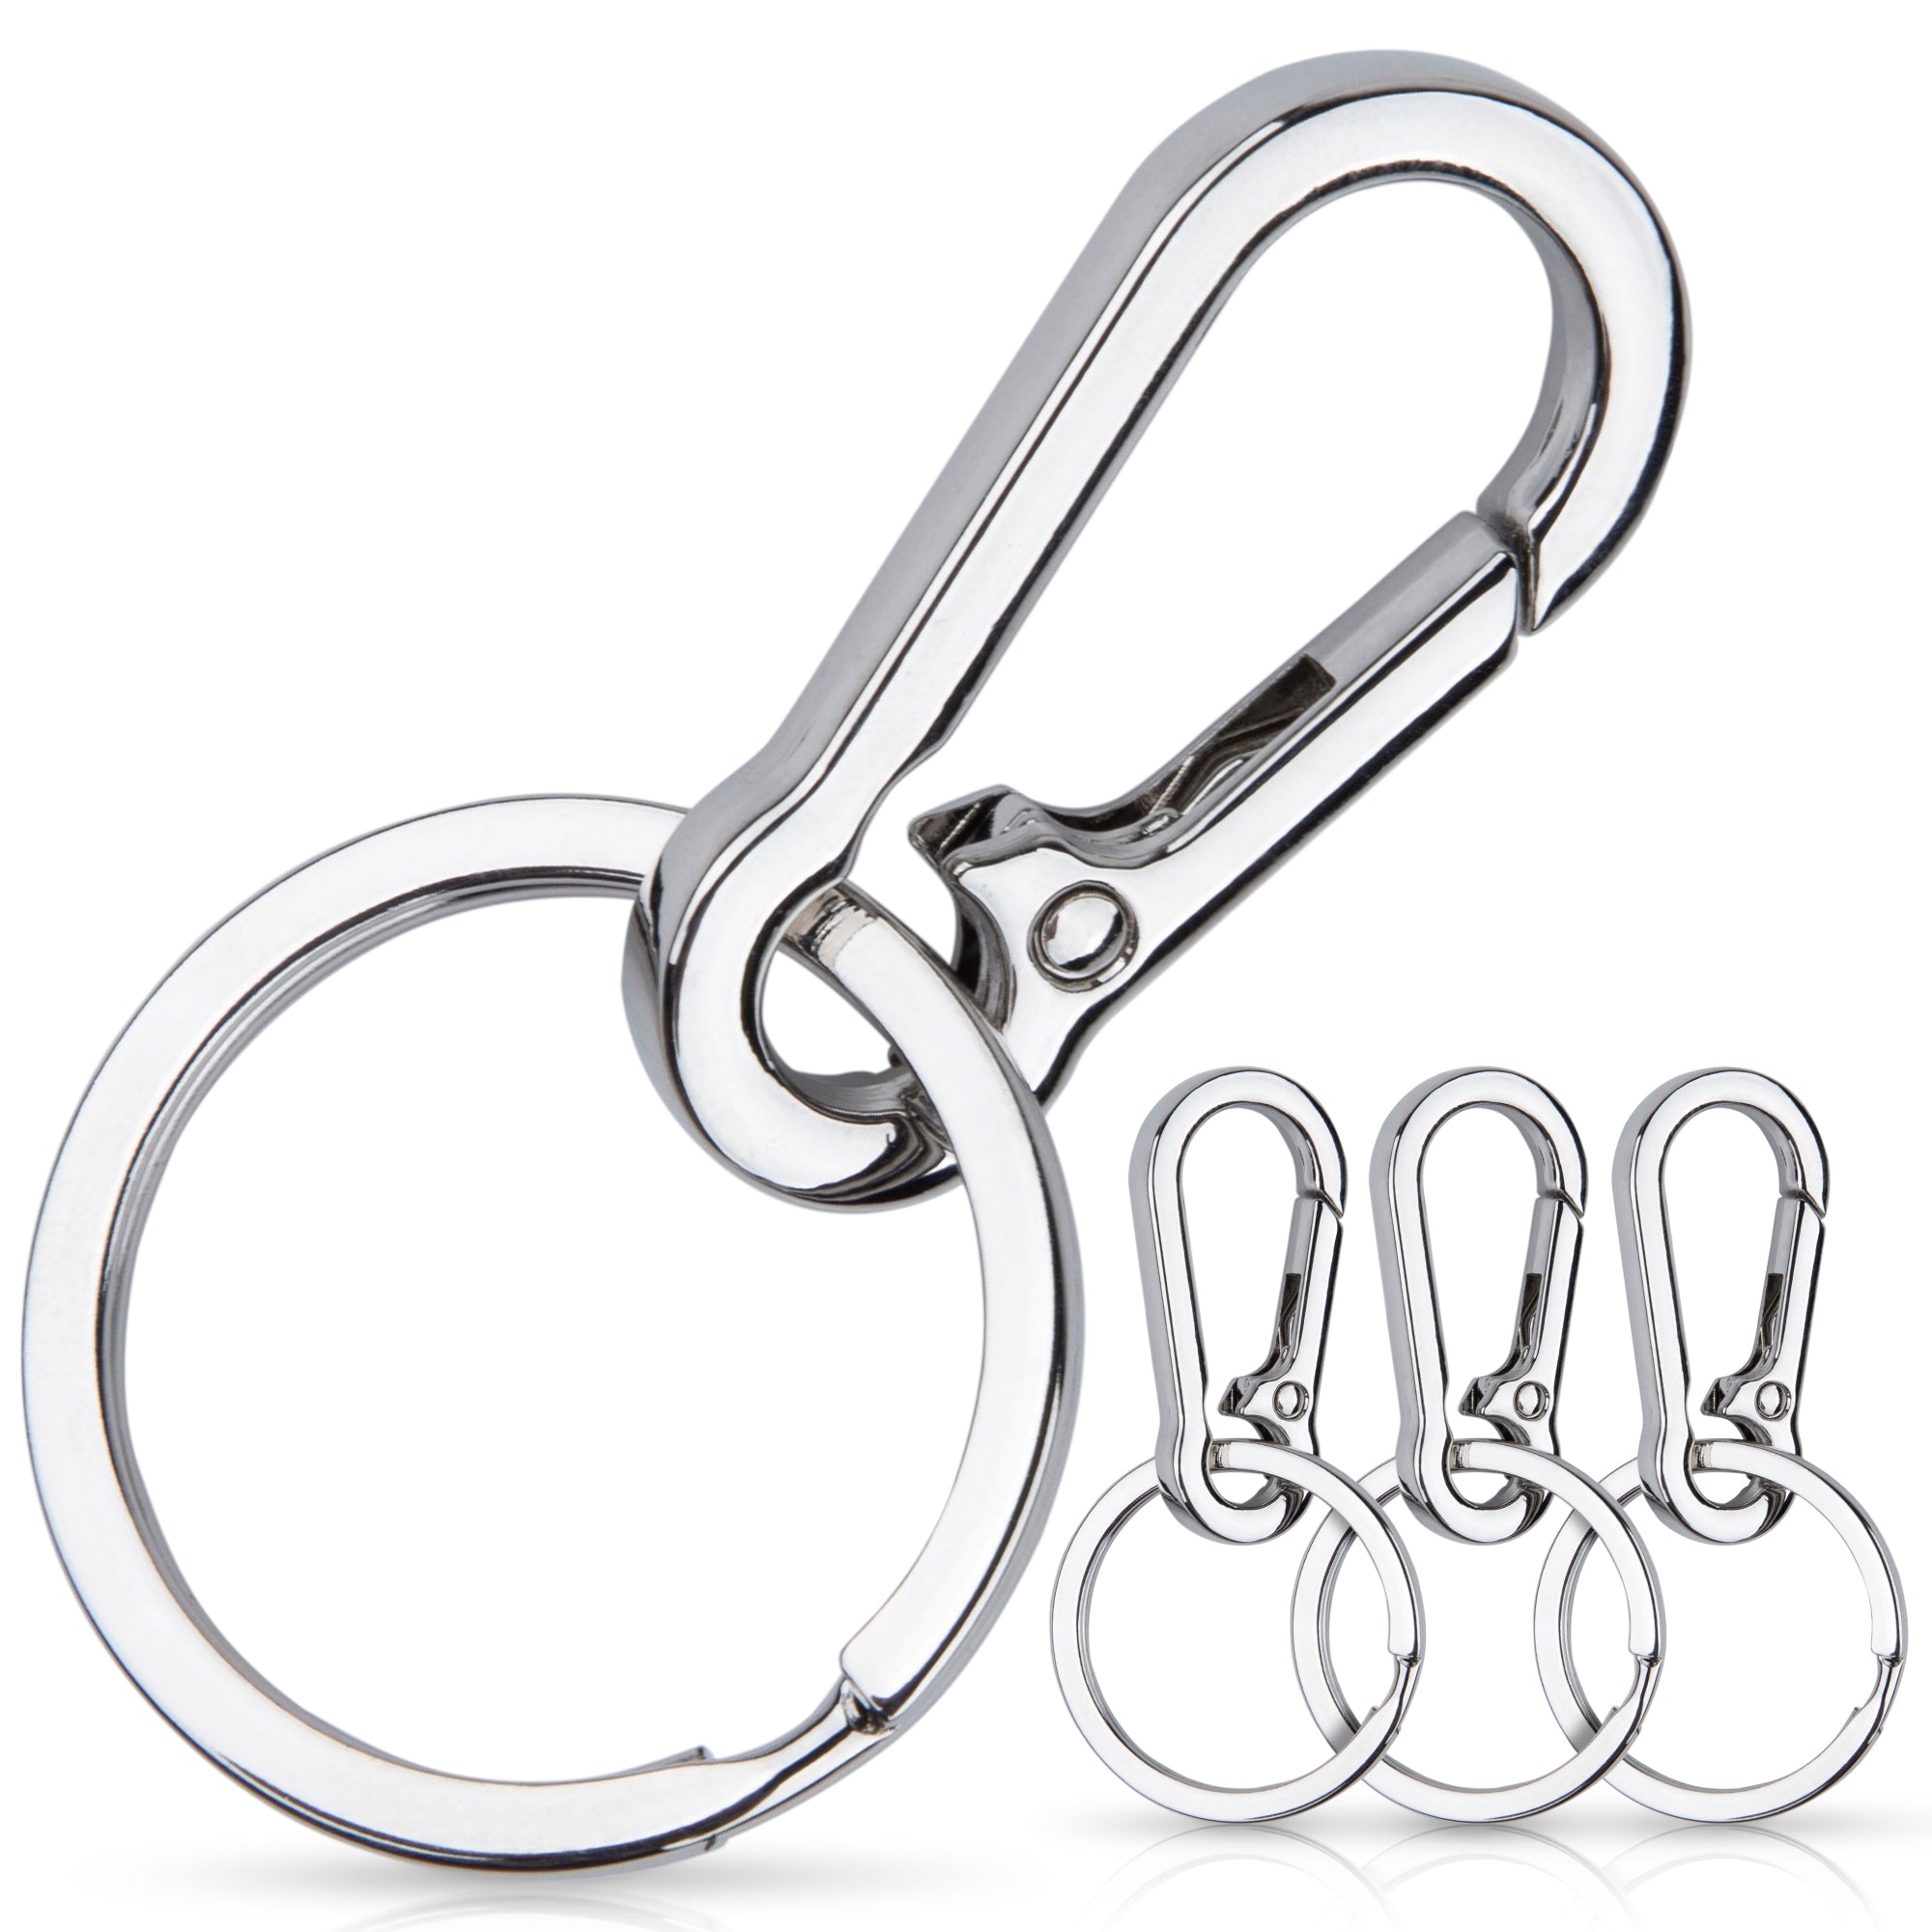 4 Piece Key Rings with small Carabiners – CREST Products